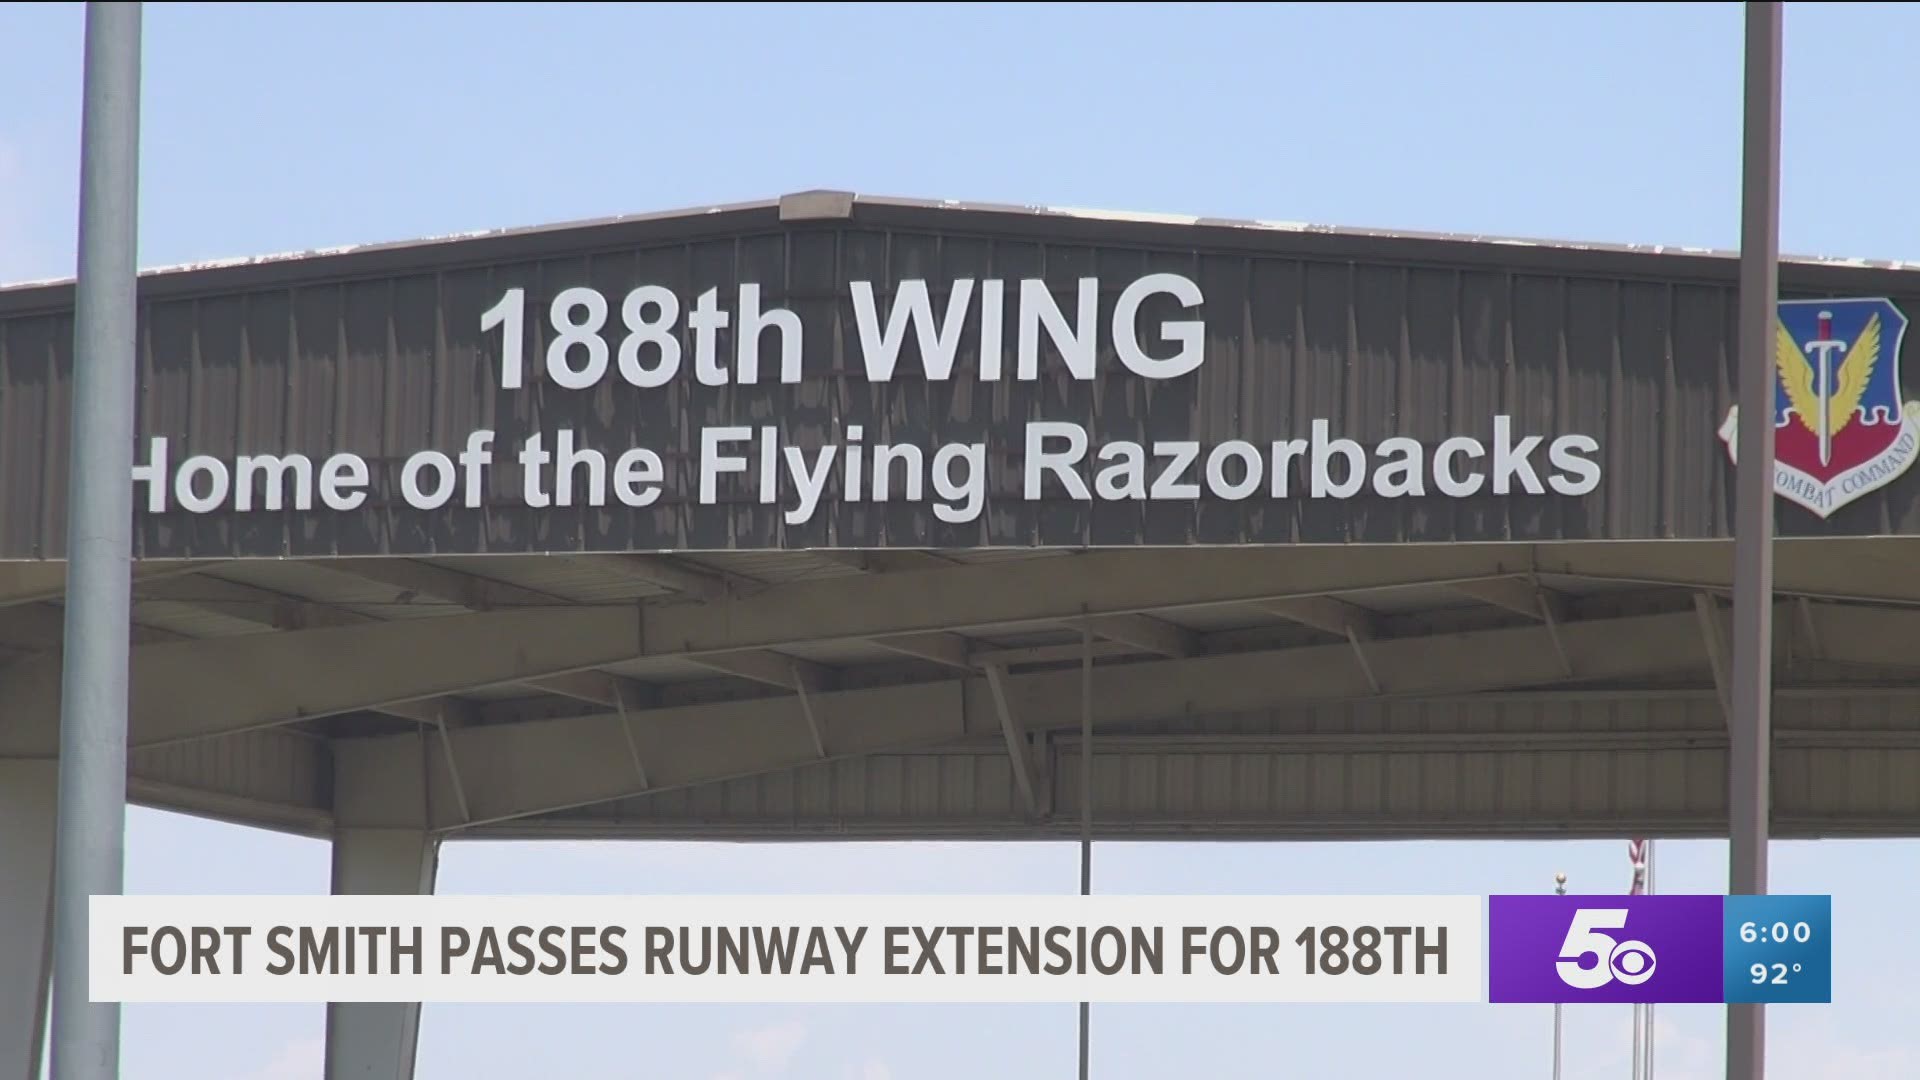 Fort Smith City Directors passed an ordinance on Tuesday (June 15) committing $5 million to help pay for a runway extension project at the 188th Wing.